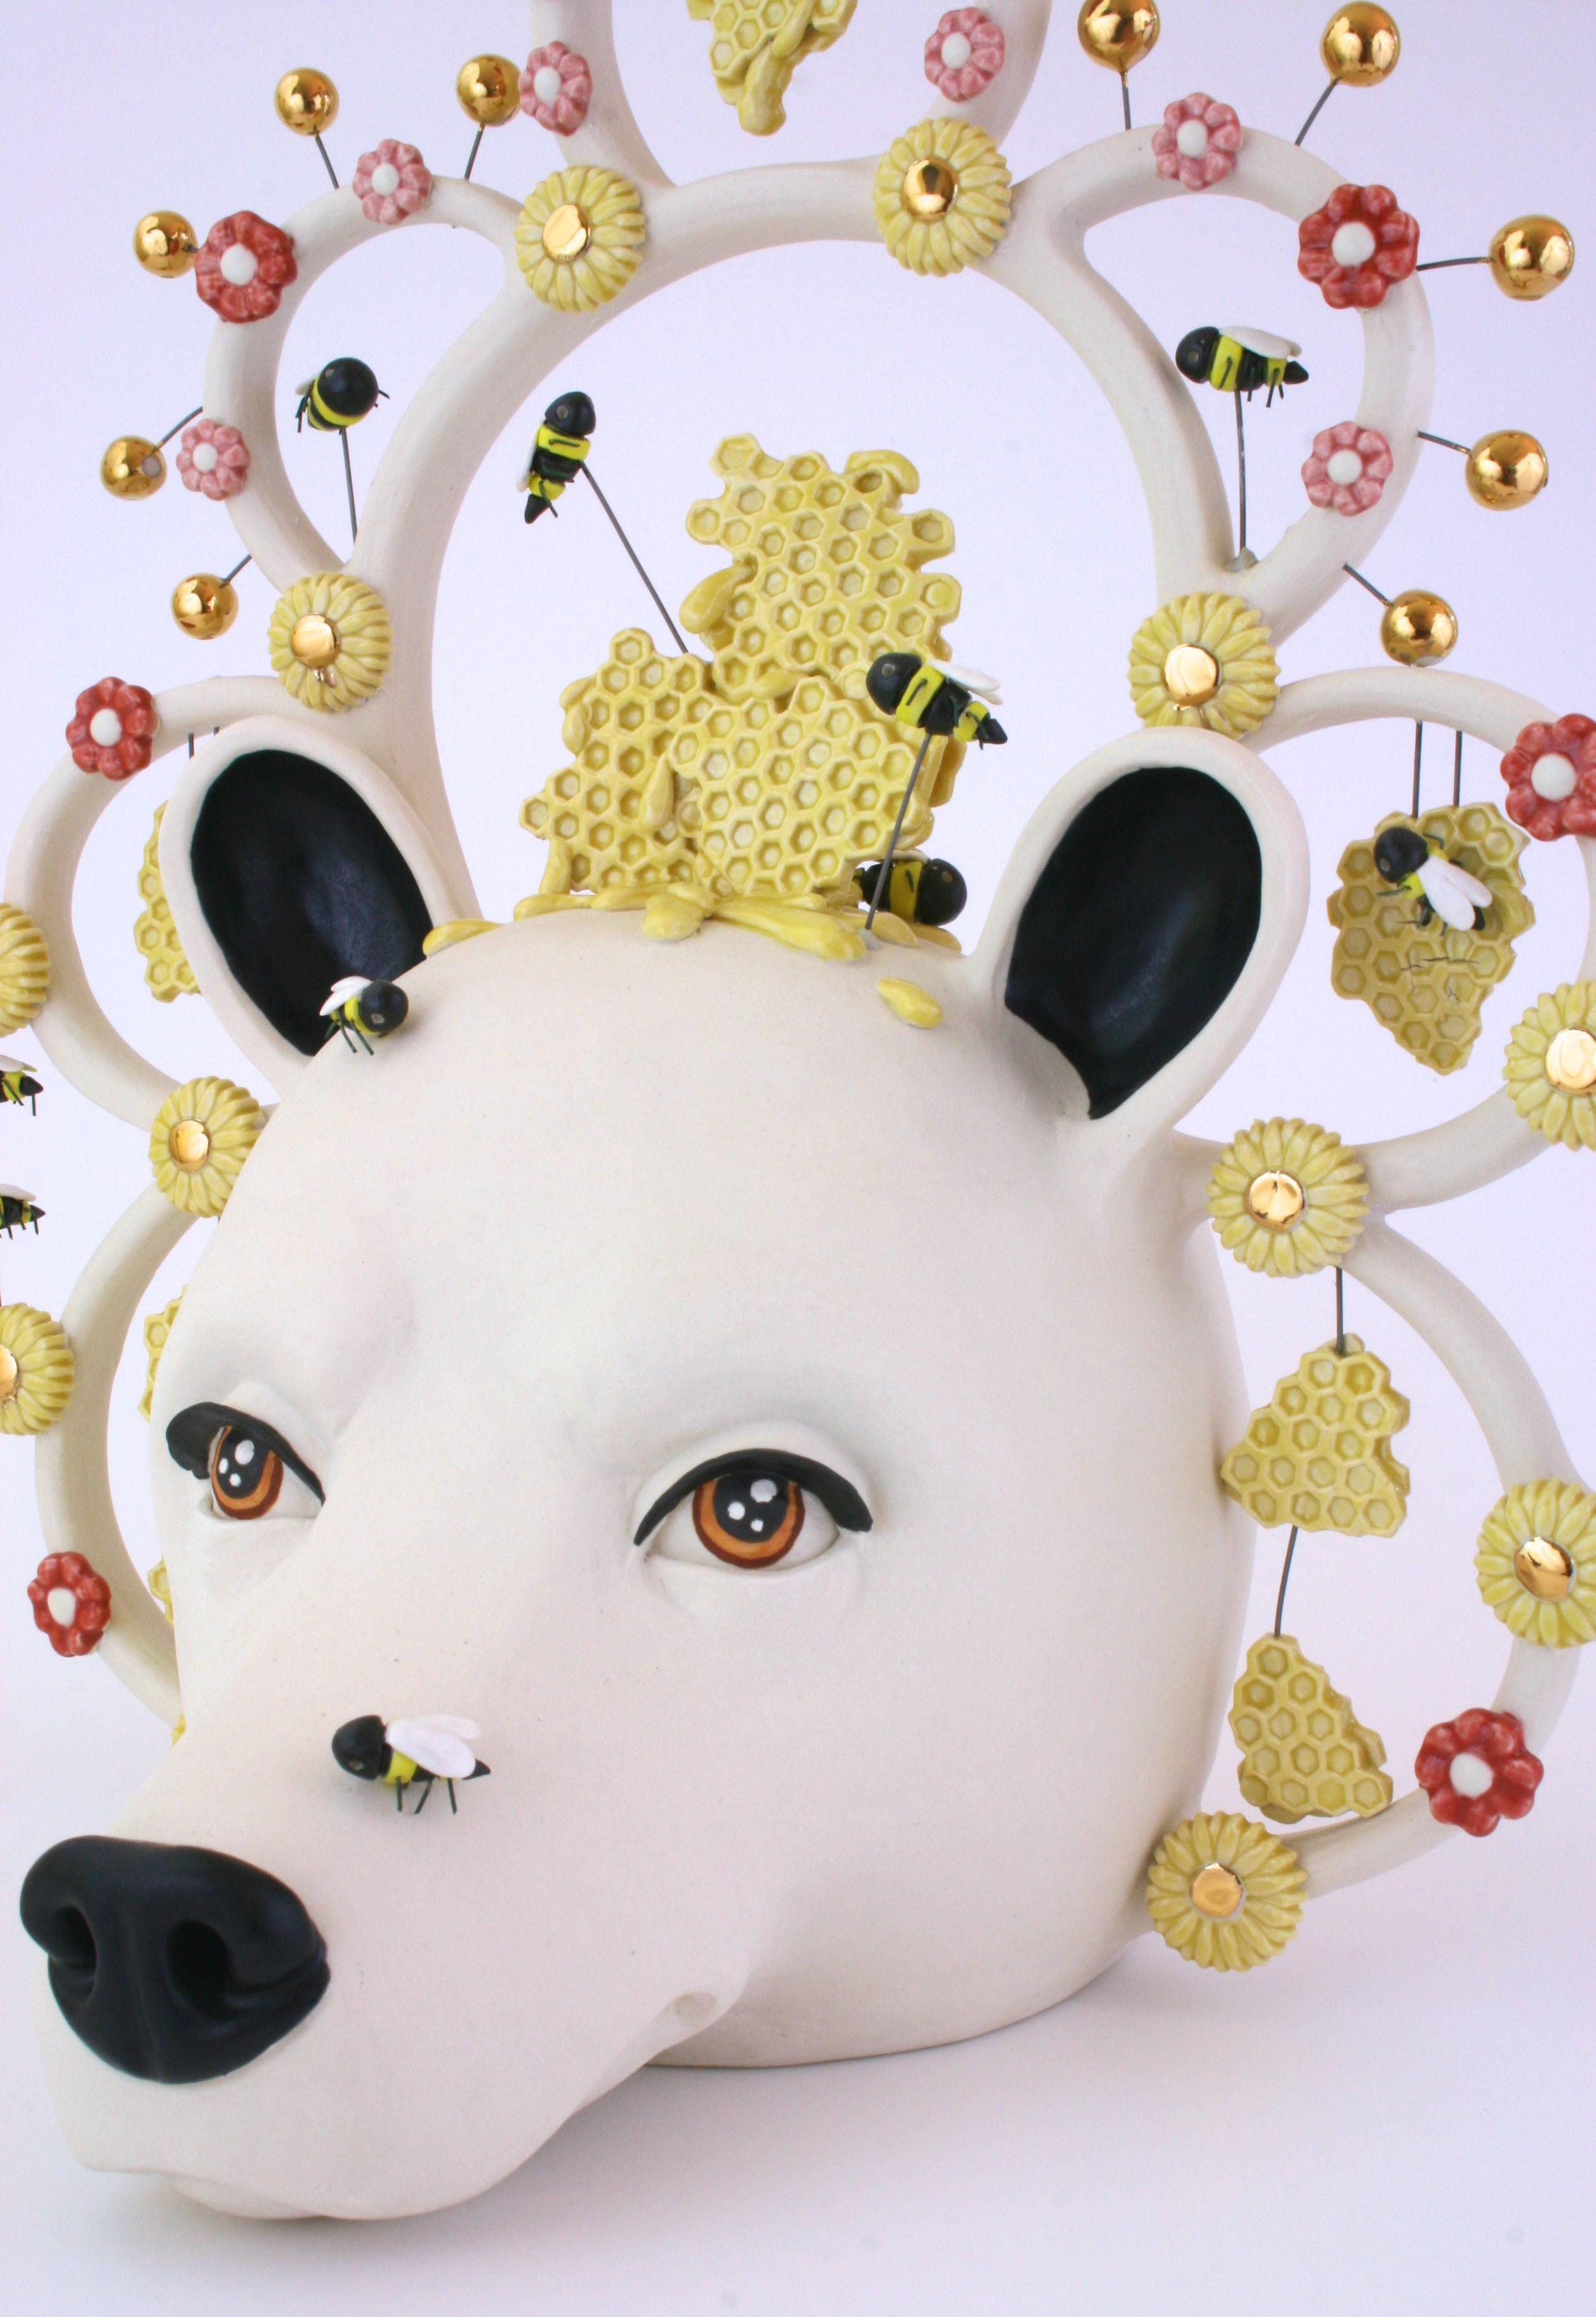 BEES AND A BEAR - porcelain ceramic sculpture with bear, bees and flowers - Sculpture by Taylor Robenalt